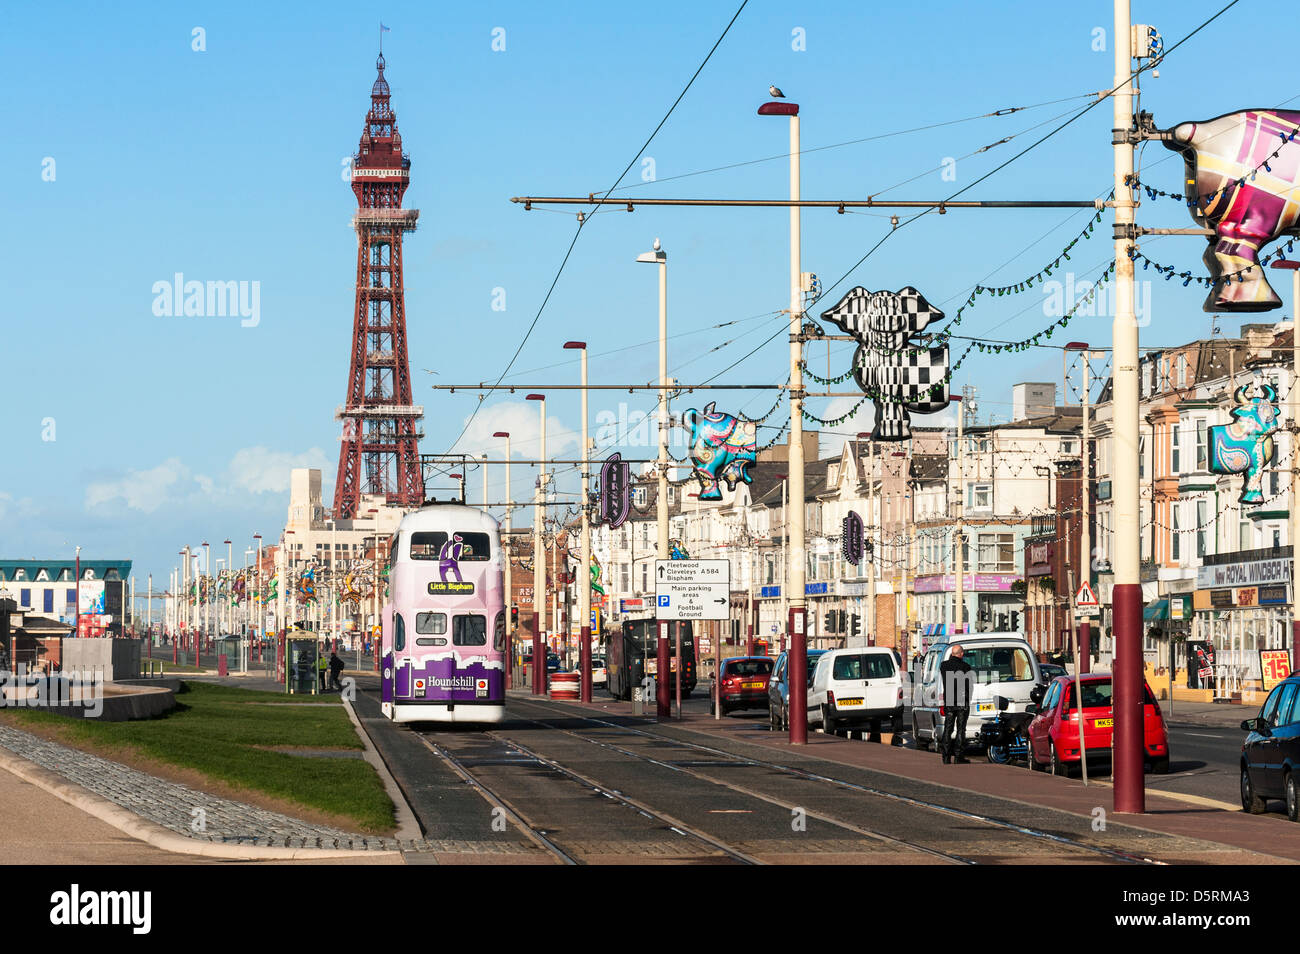 Blackpool seafront with Blackpool tower and tram, Lancashire, England, UK Stock Photo